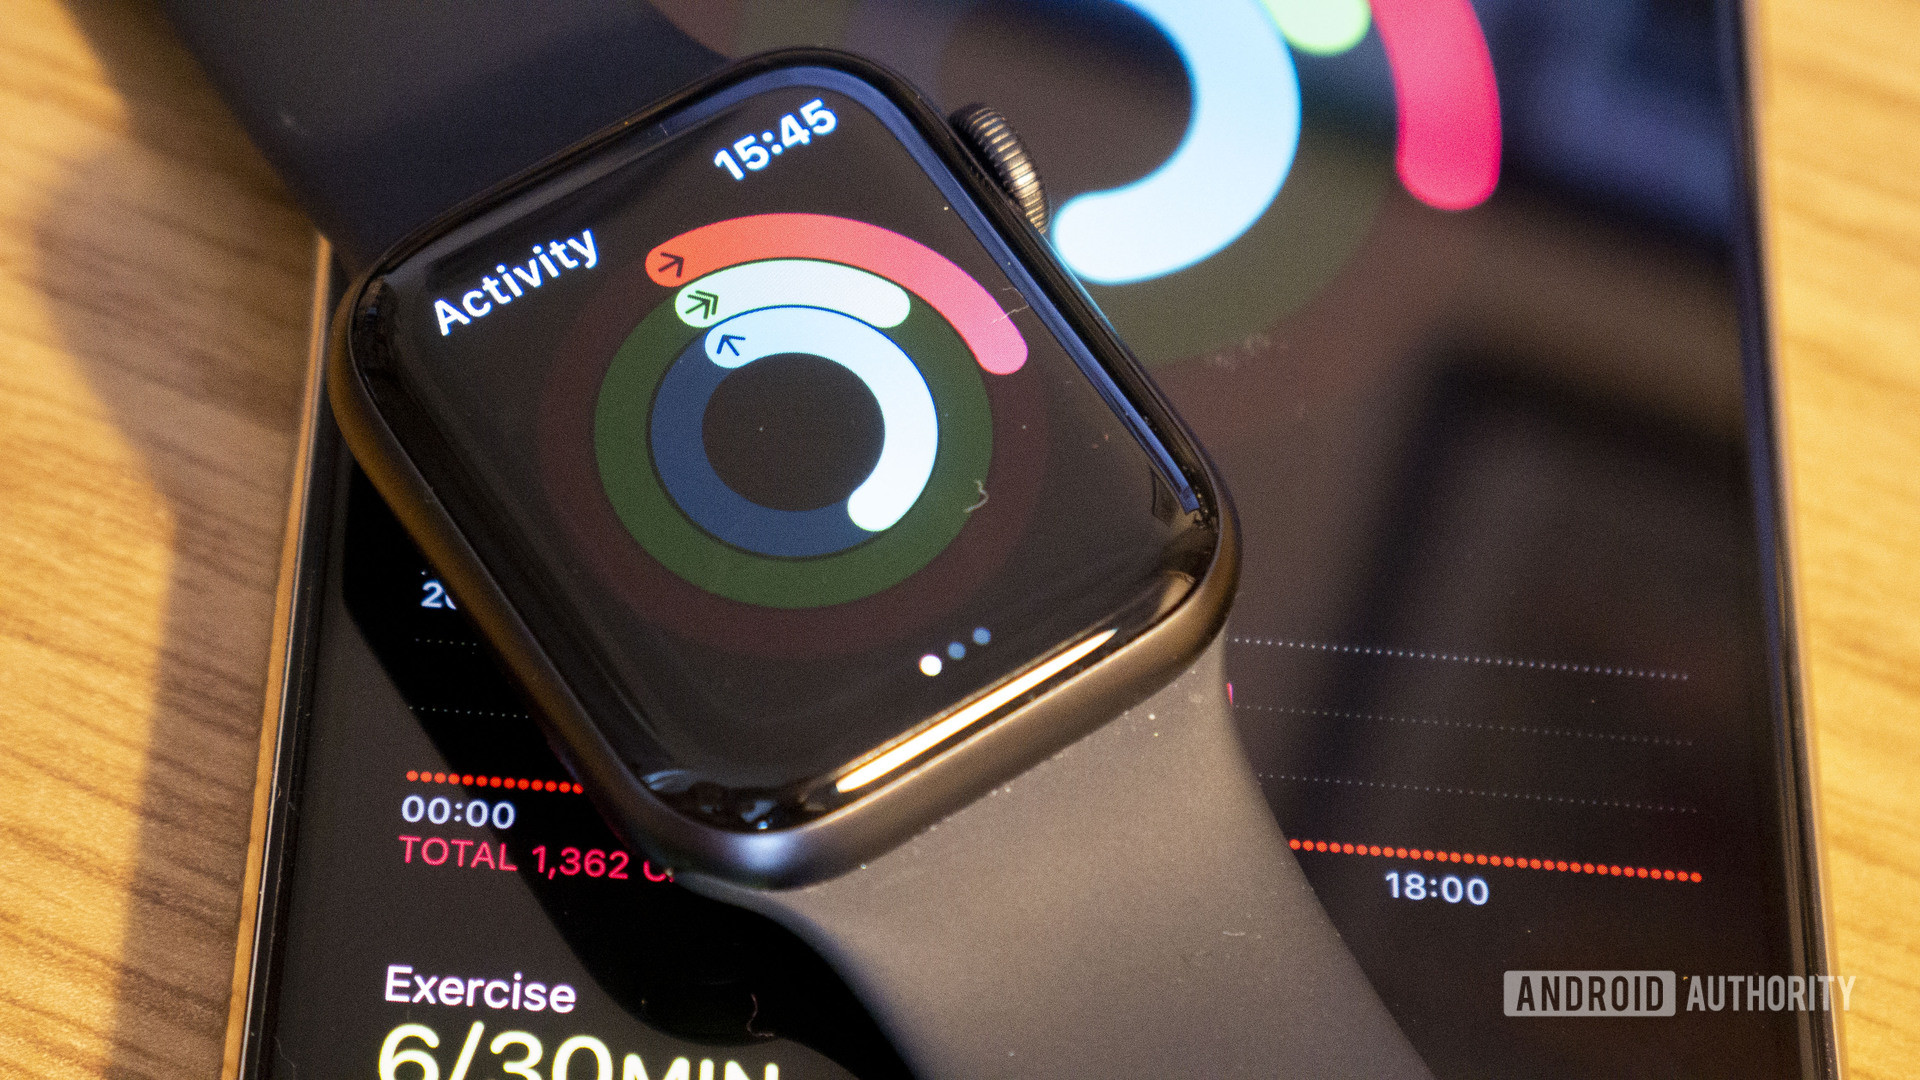 An Apple Watch Watch 5 rests on an iPhone, displaying a users activity and calorie tracking stats.